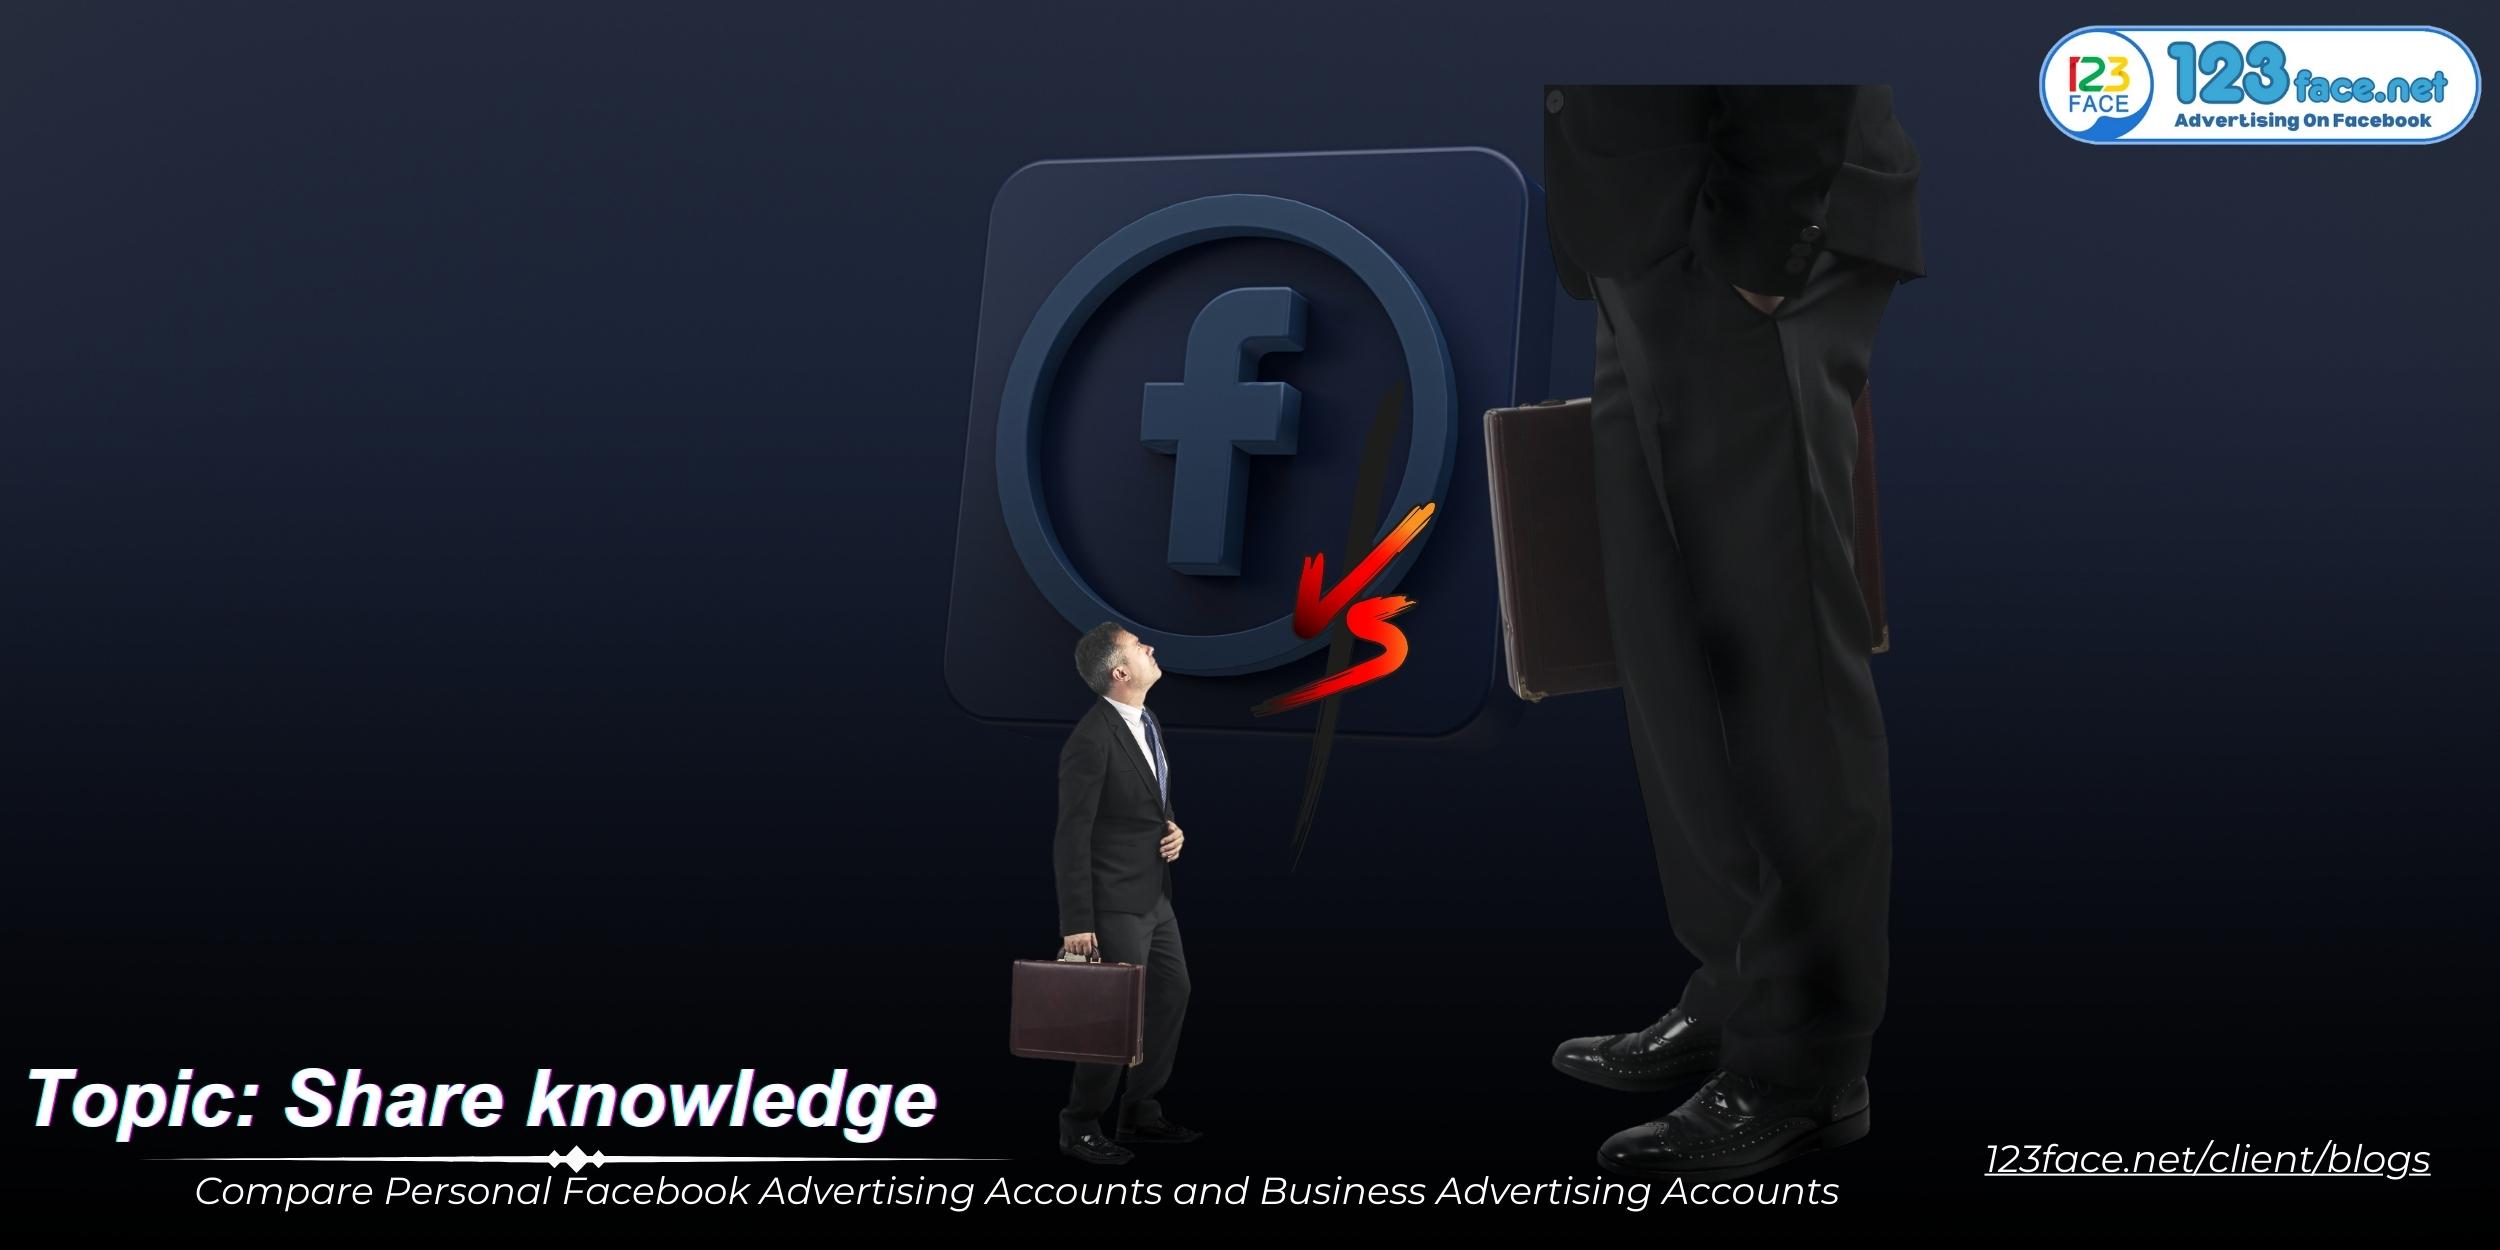 Compare Personal Facebook Advertising Accounts and Business Advertising Accounts